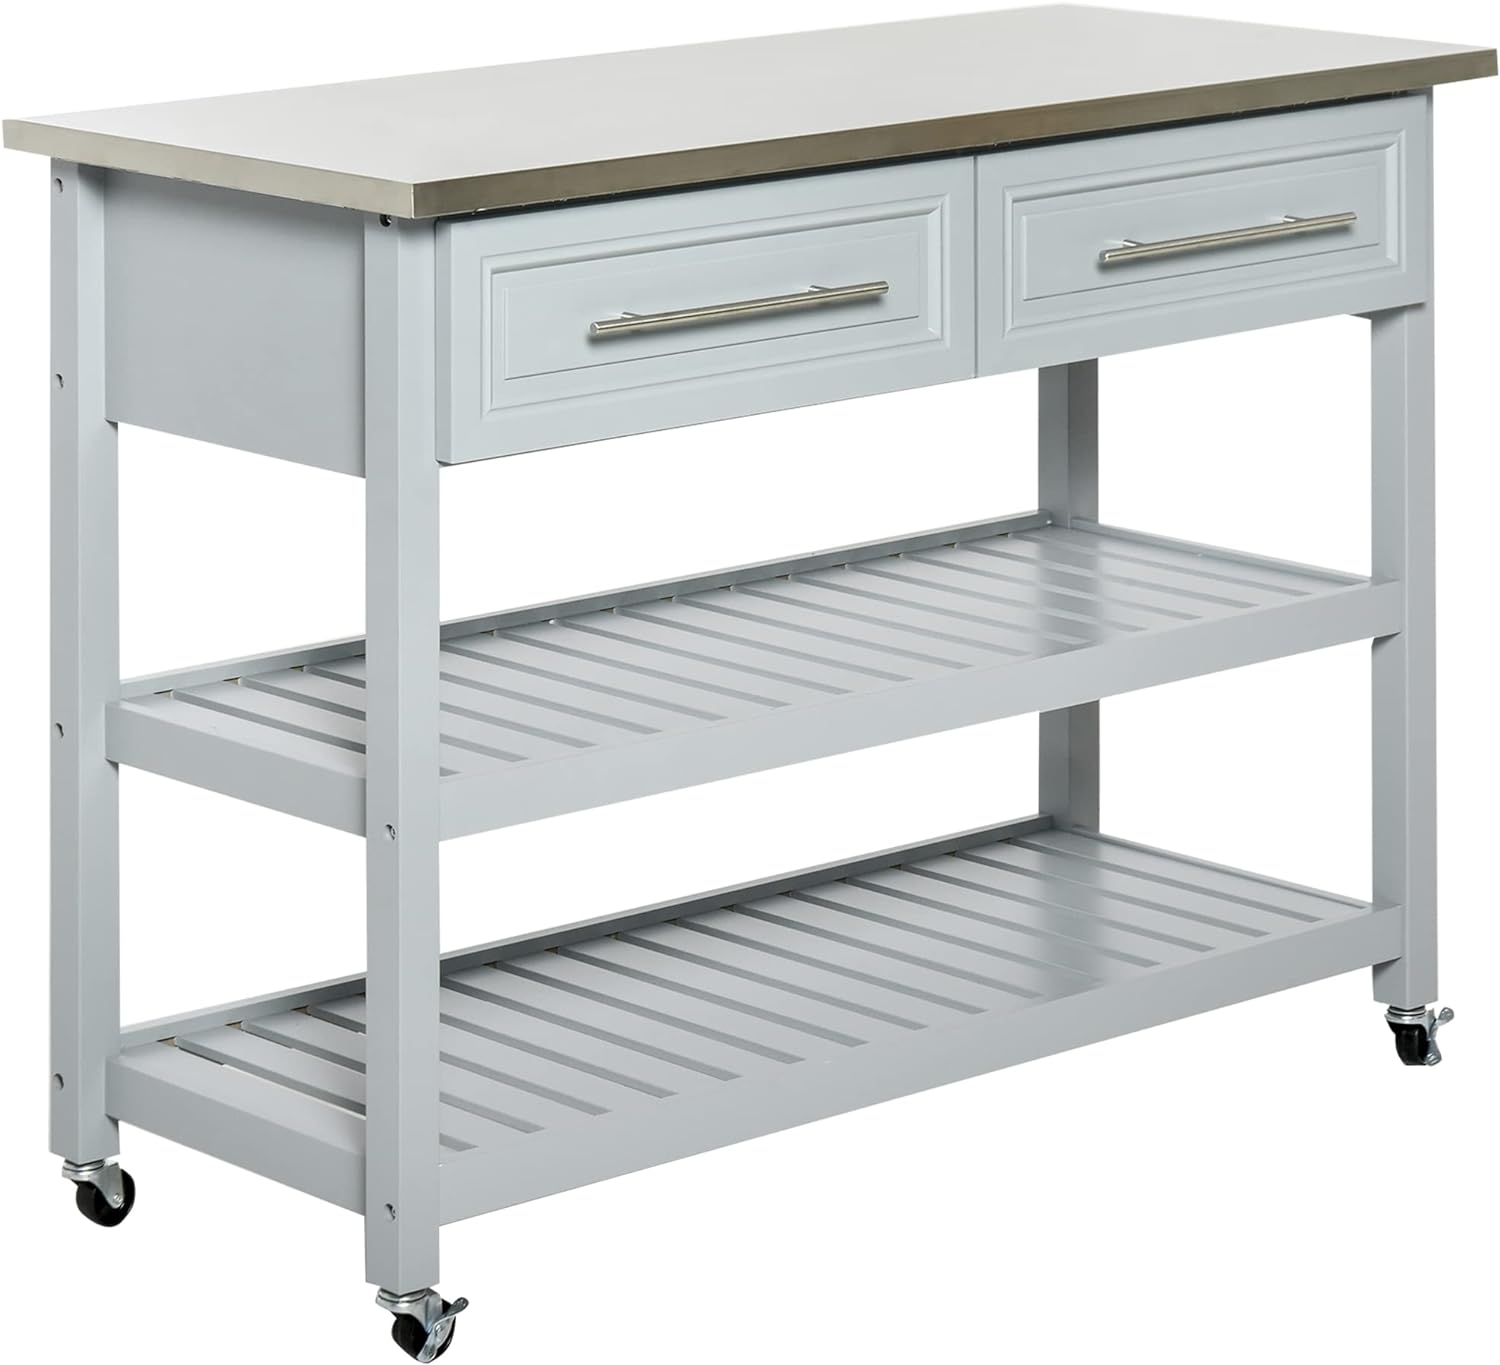 HOMCOM Kitchen Island Rolling Utility Trolley Cart with 2 Drawers Stainless Steel Top - Grey